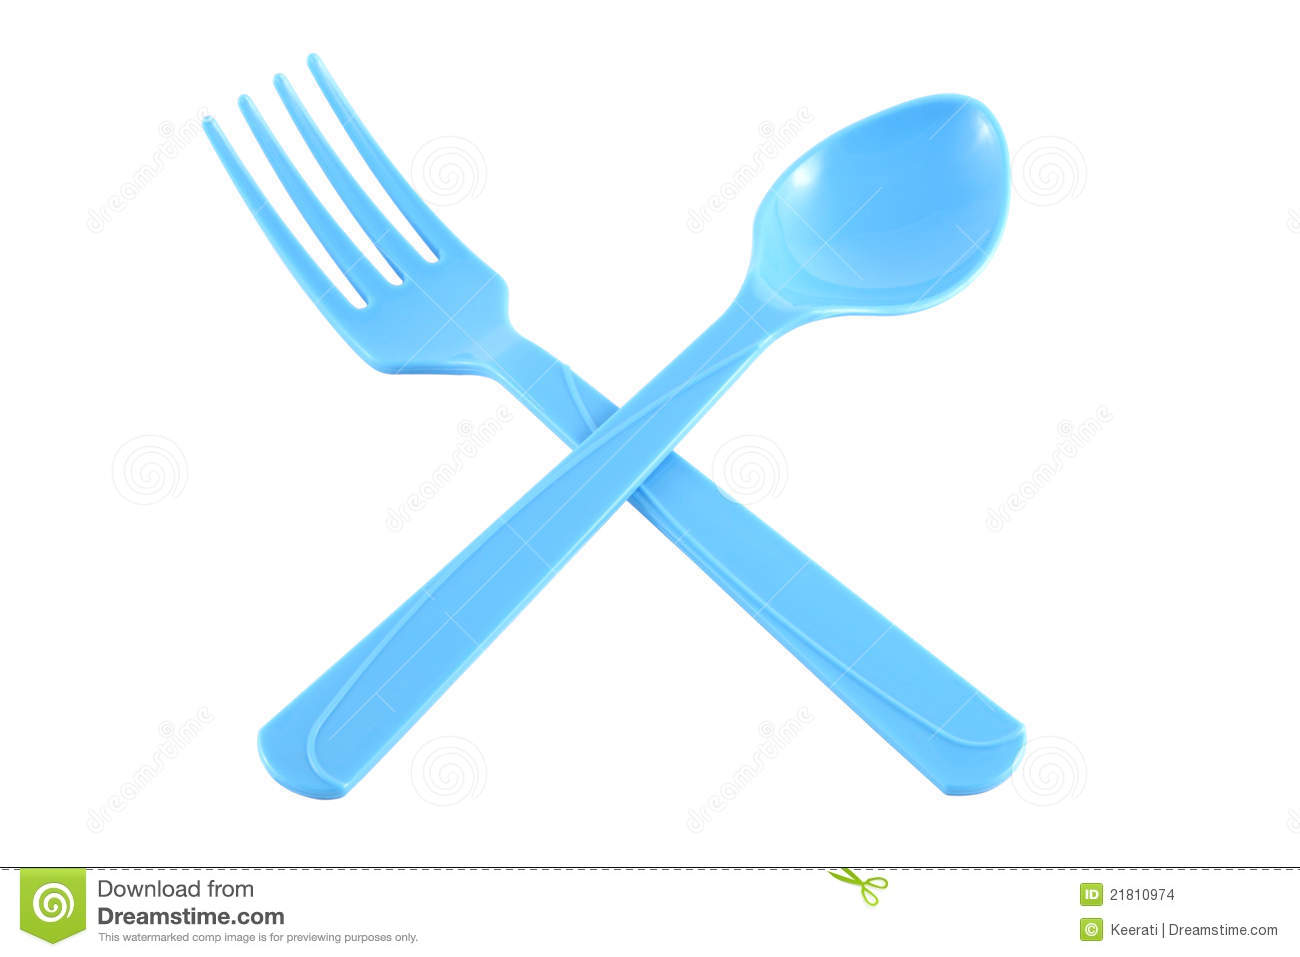 Cross Blue Plastic Spoon And Fork Stock Images   Image  21810974